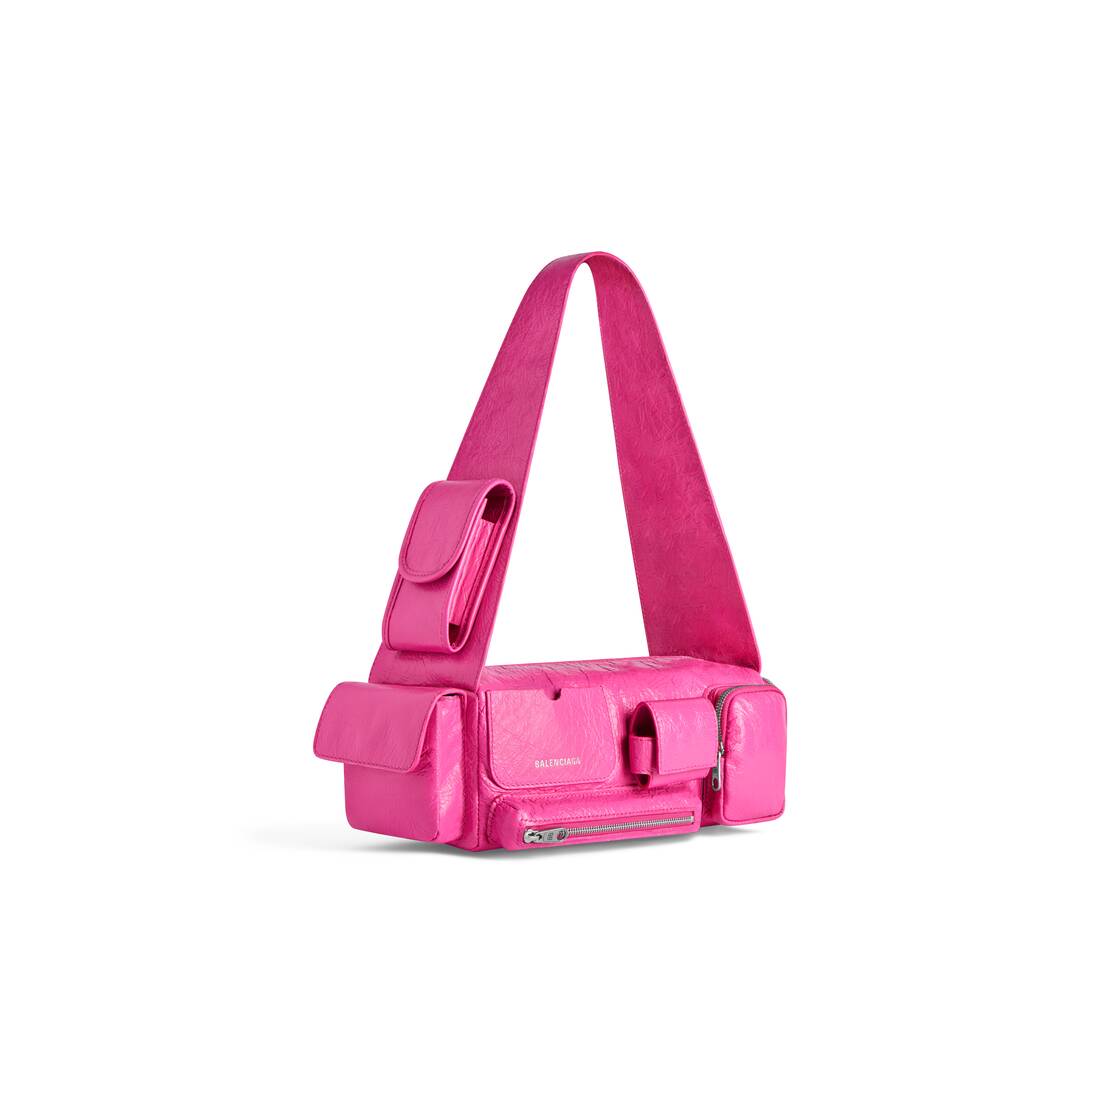 Superbusy Xs Sling Bag in Bright Pink